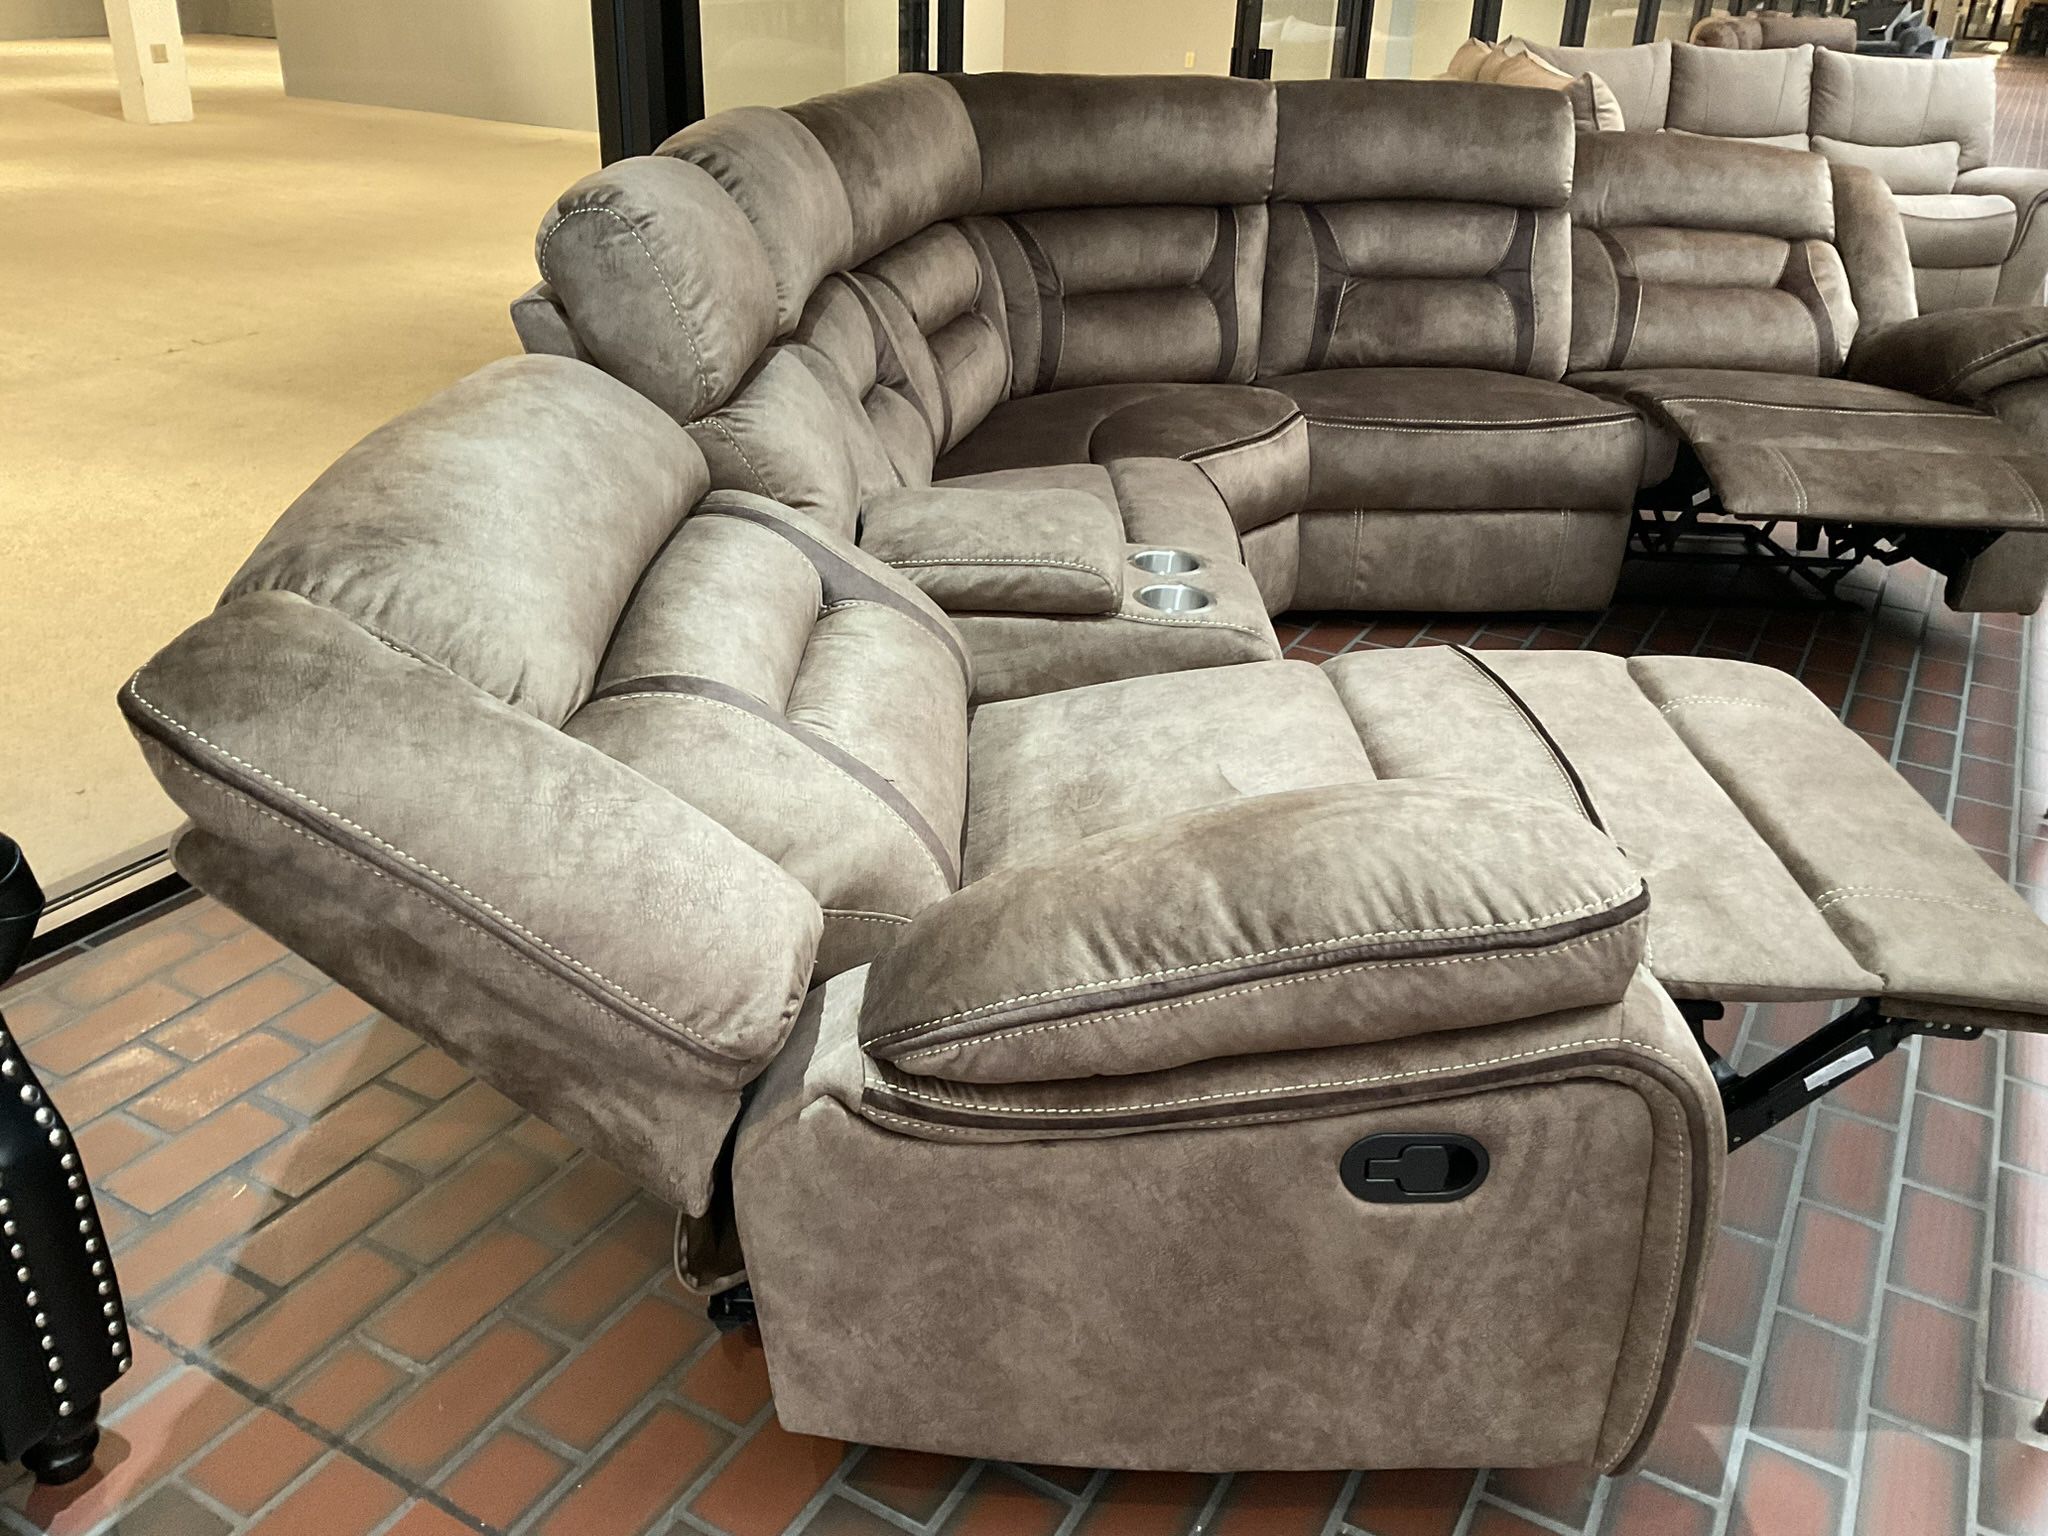 New sectional sofa manual recliner suede fabric by Kathy Ireland.